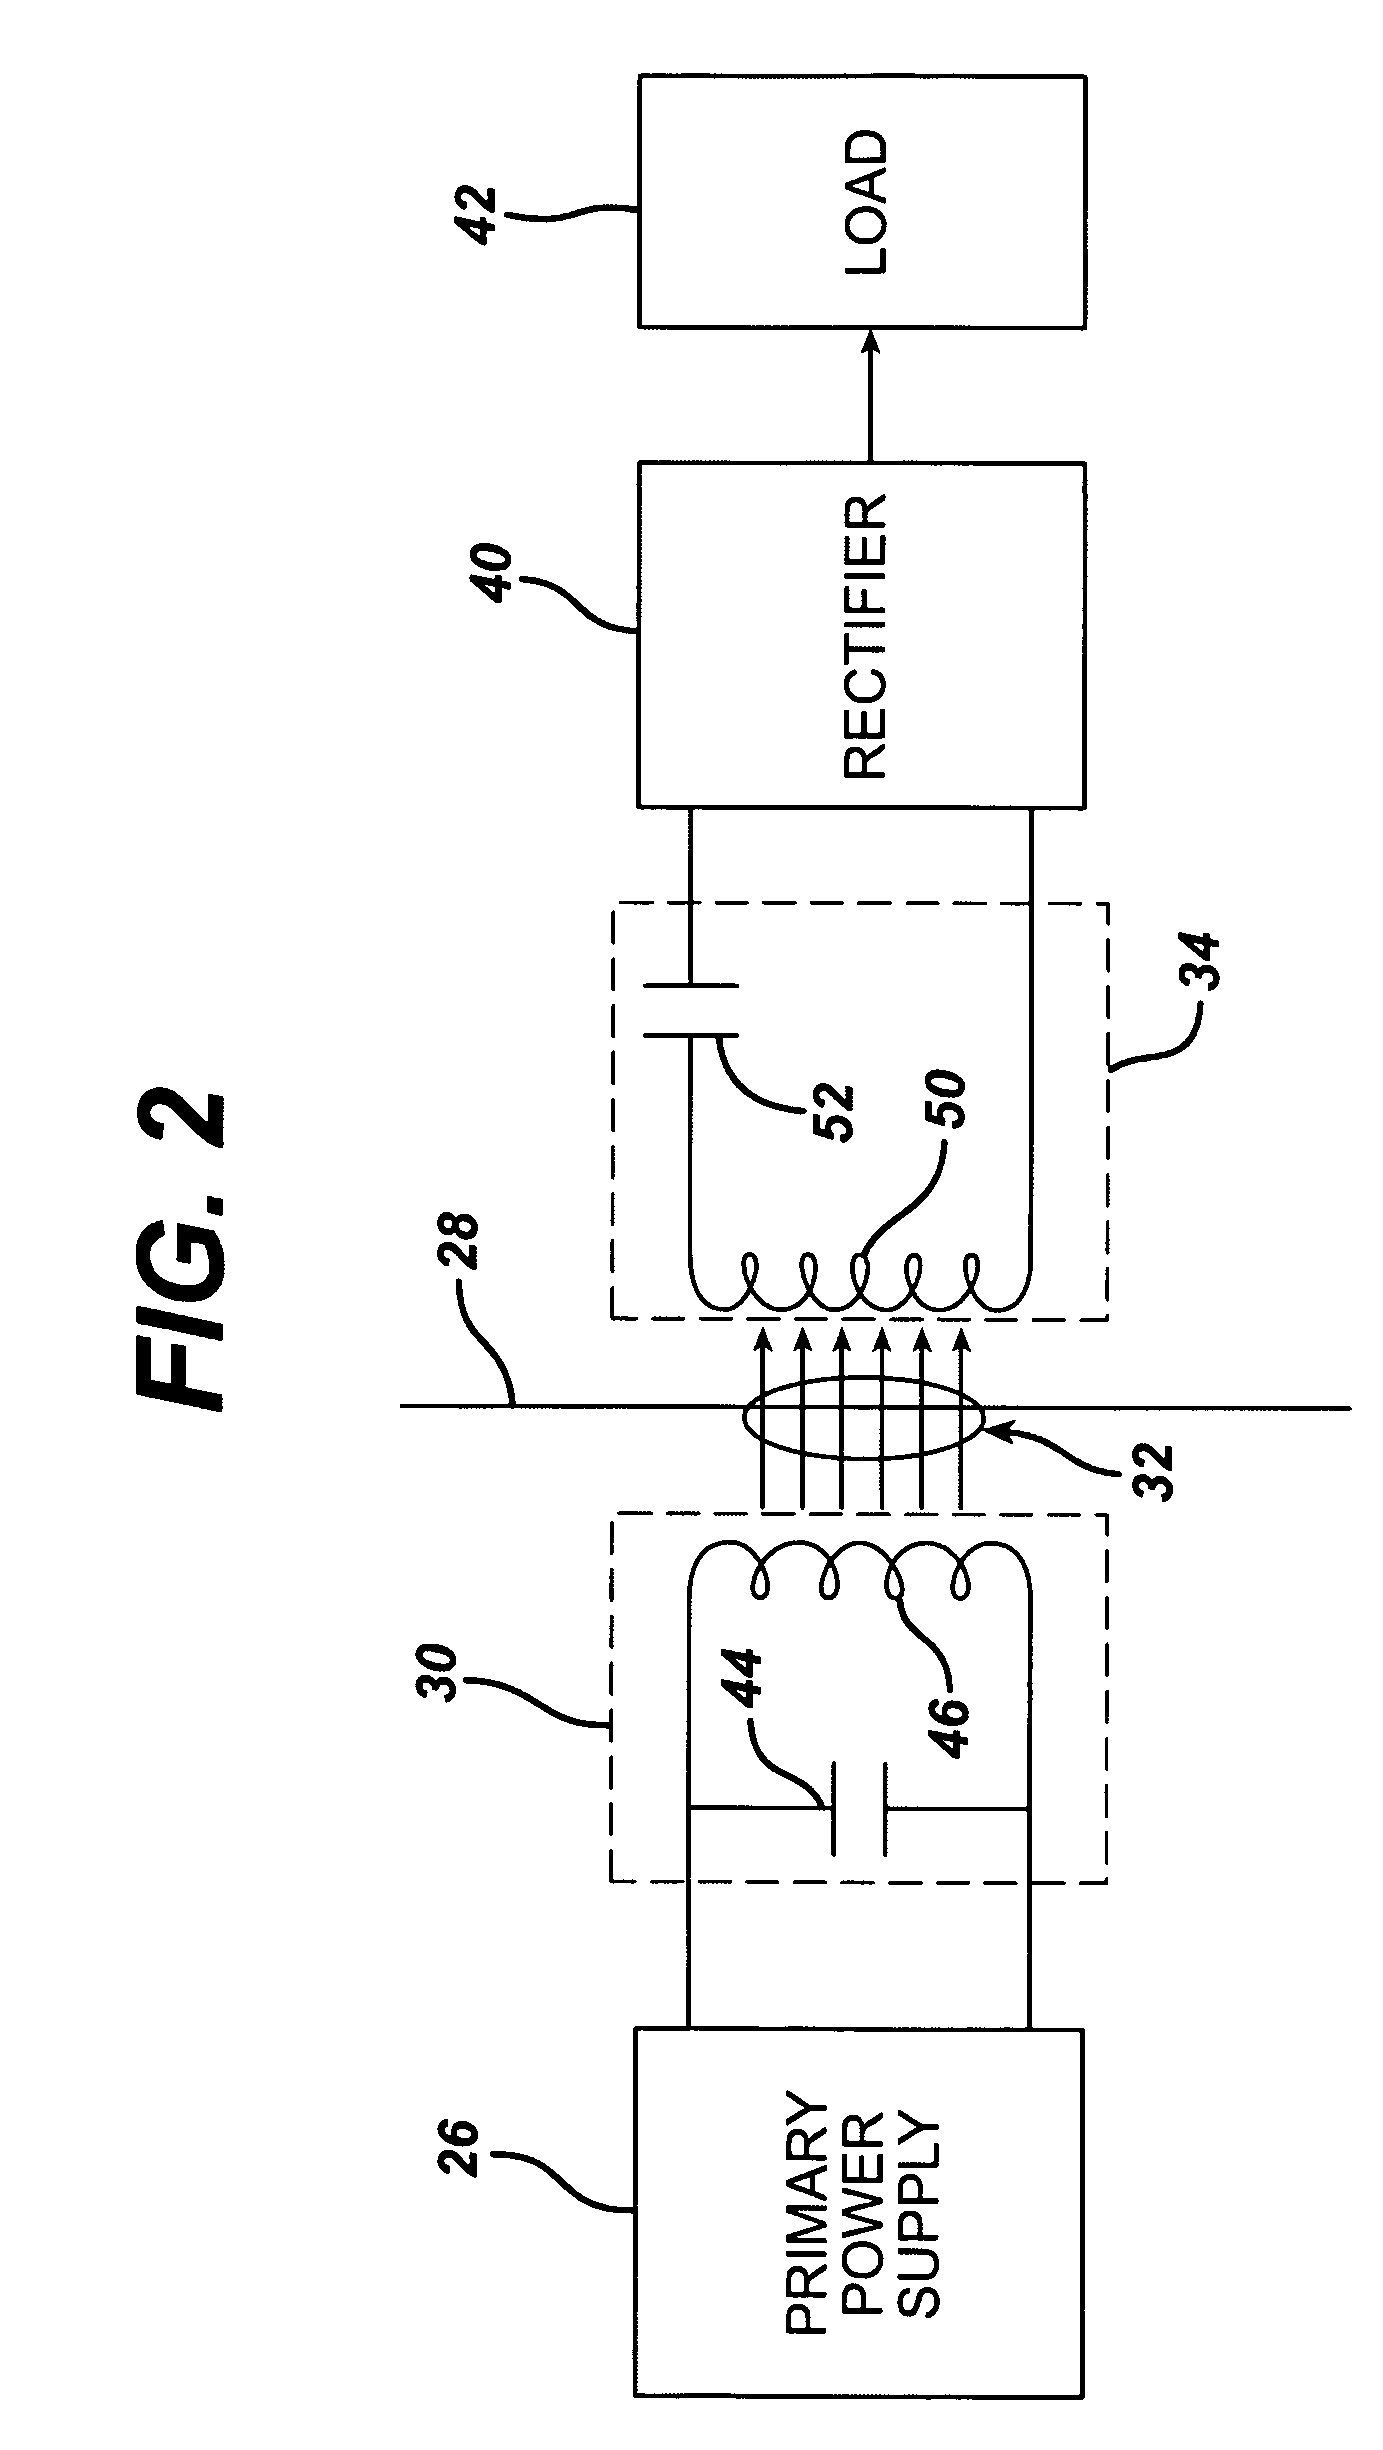 Low frequency transcutaneous energy transfer to implanted medical device